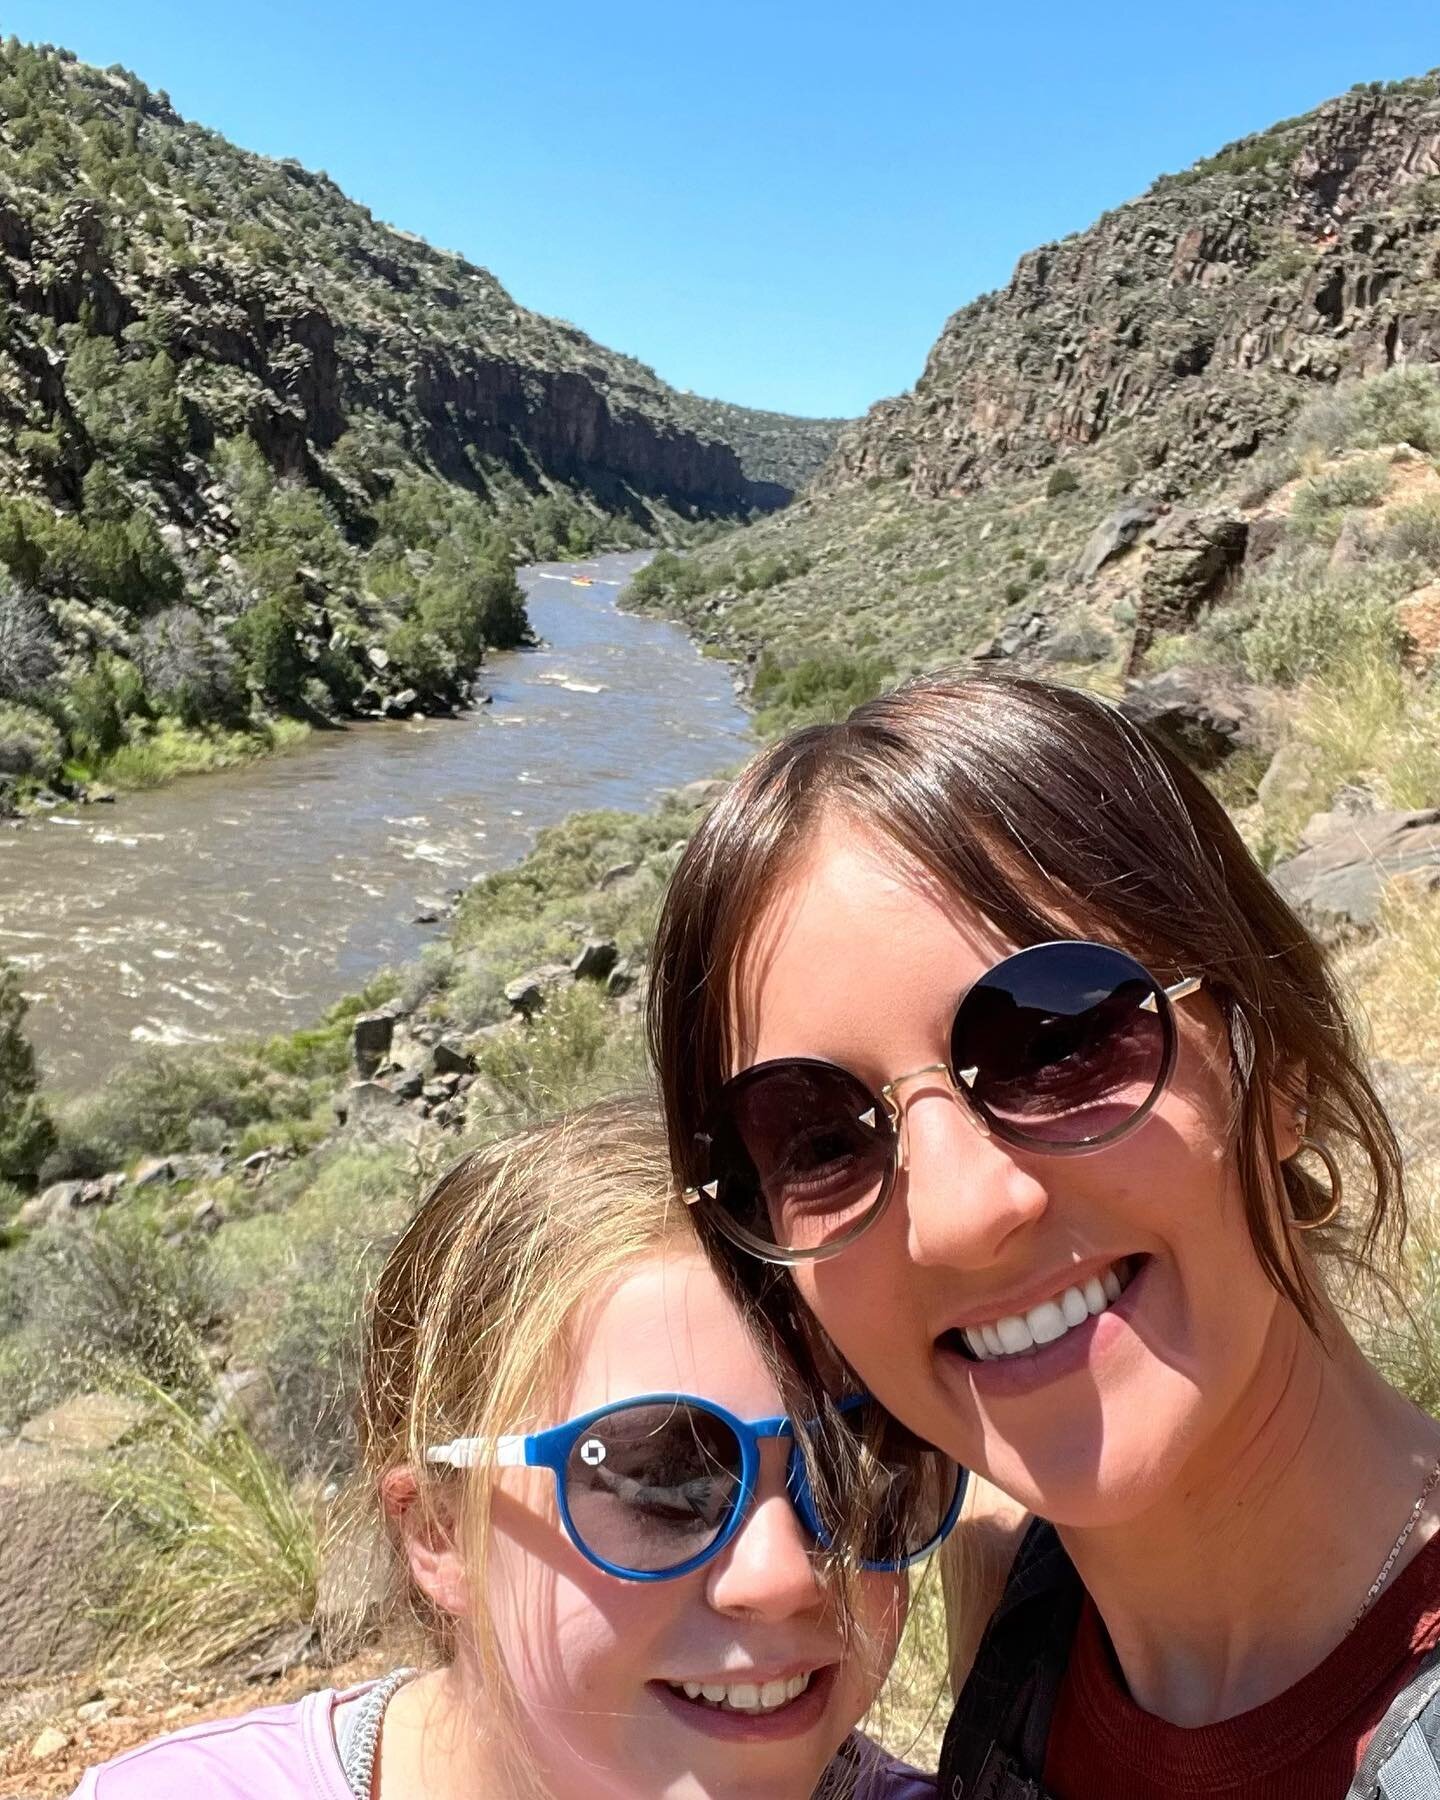 Got to spend some very special one-on-one time with a very special young person during my bro&rsquo;s recent visit to Taos. Hiking around in nature and sharing music with the kids is what dreams are made of for me.💛 #aunthood